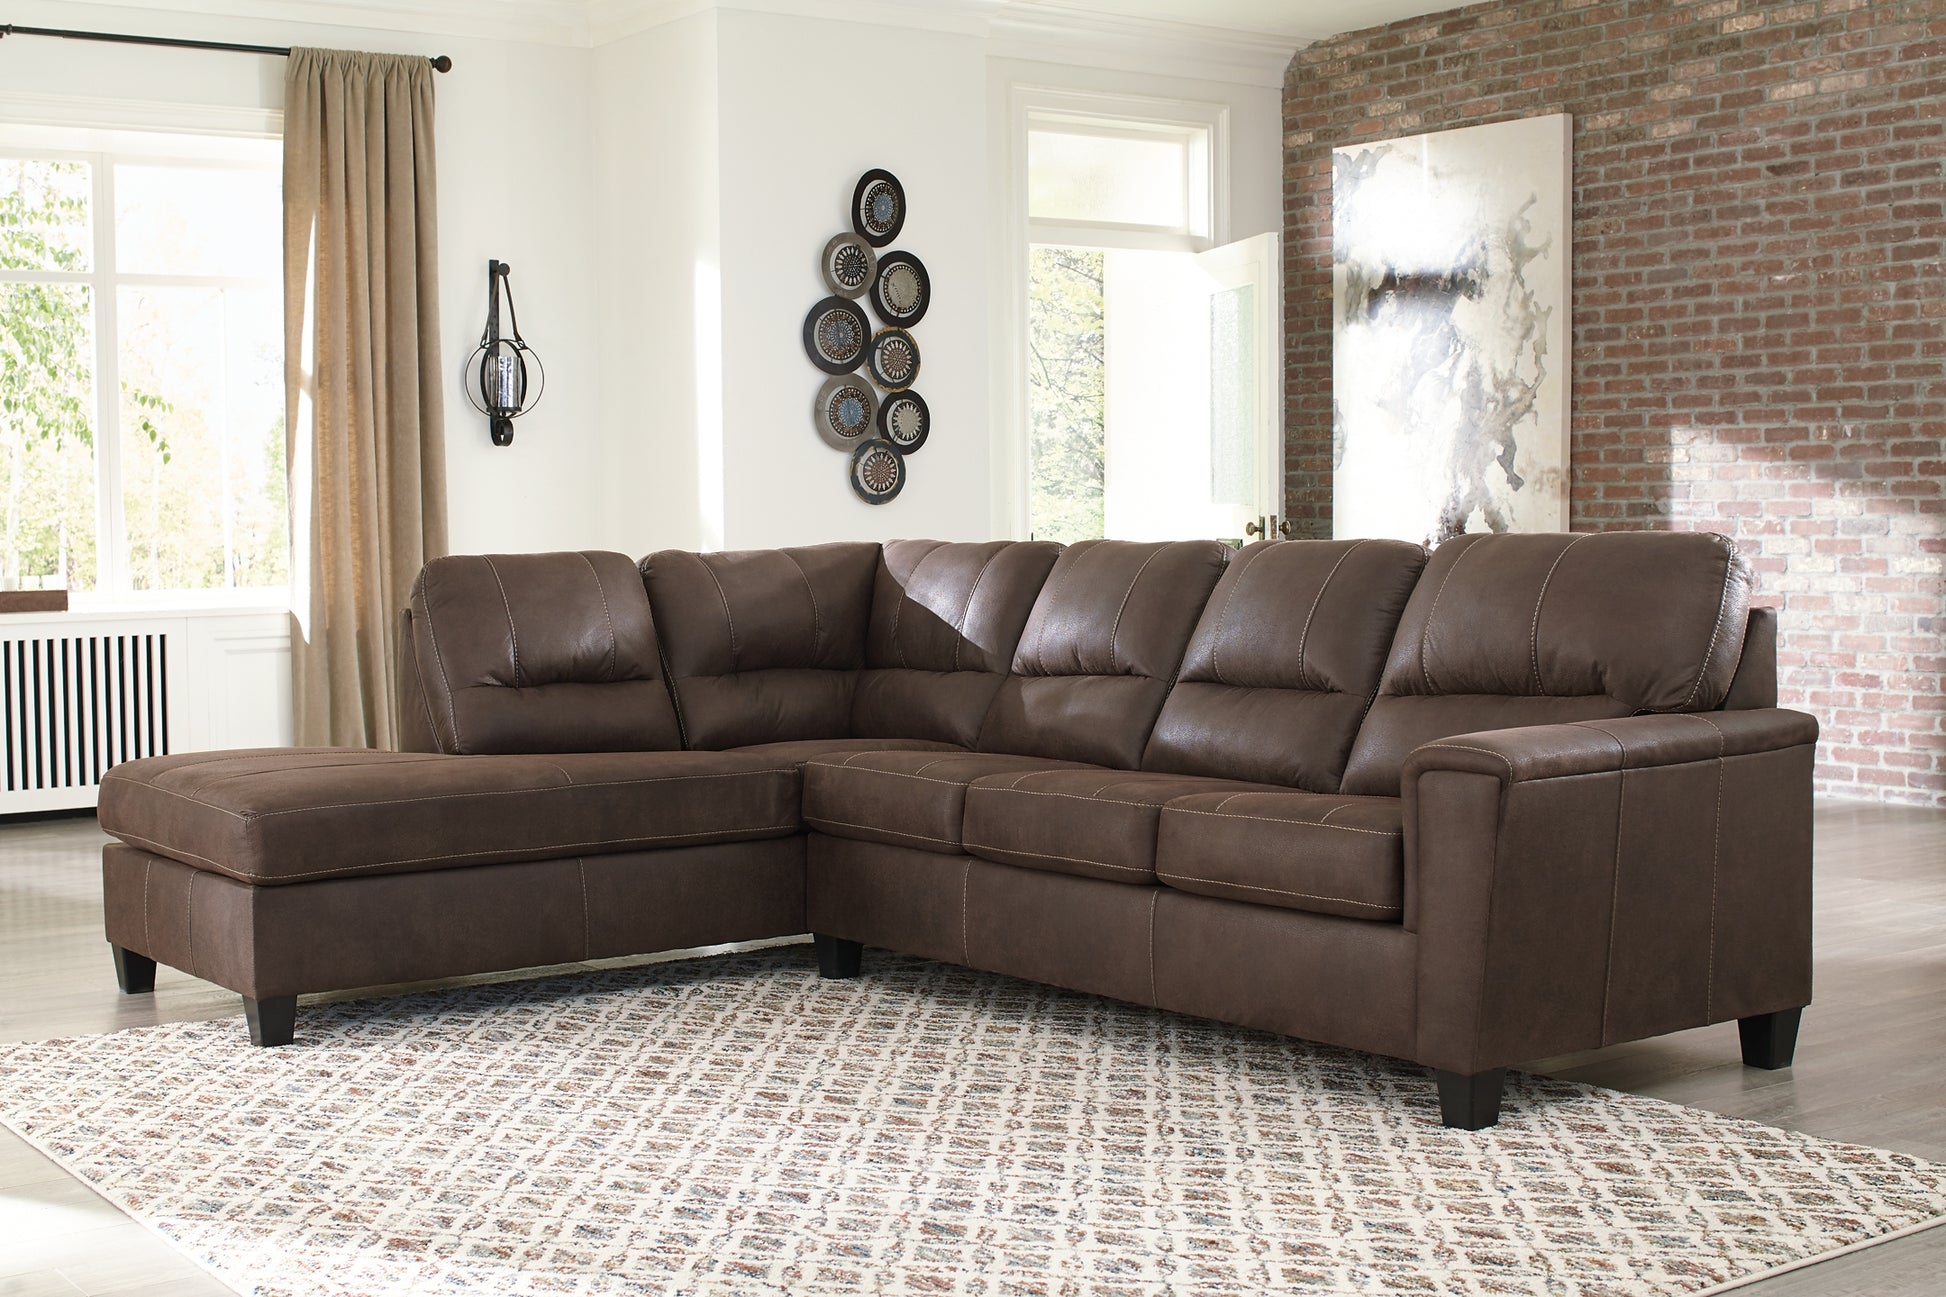 Navi 2-Piece Sectional with Chaise Wilson Furniture (OH)  in Bridgeport, Ohio. Serving Bridgeport, Yorkville, Bellaire, & Avondale